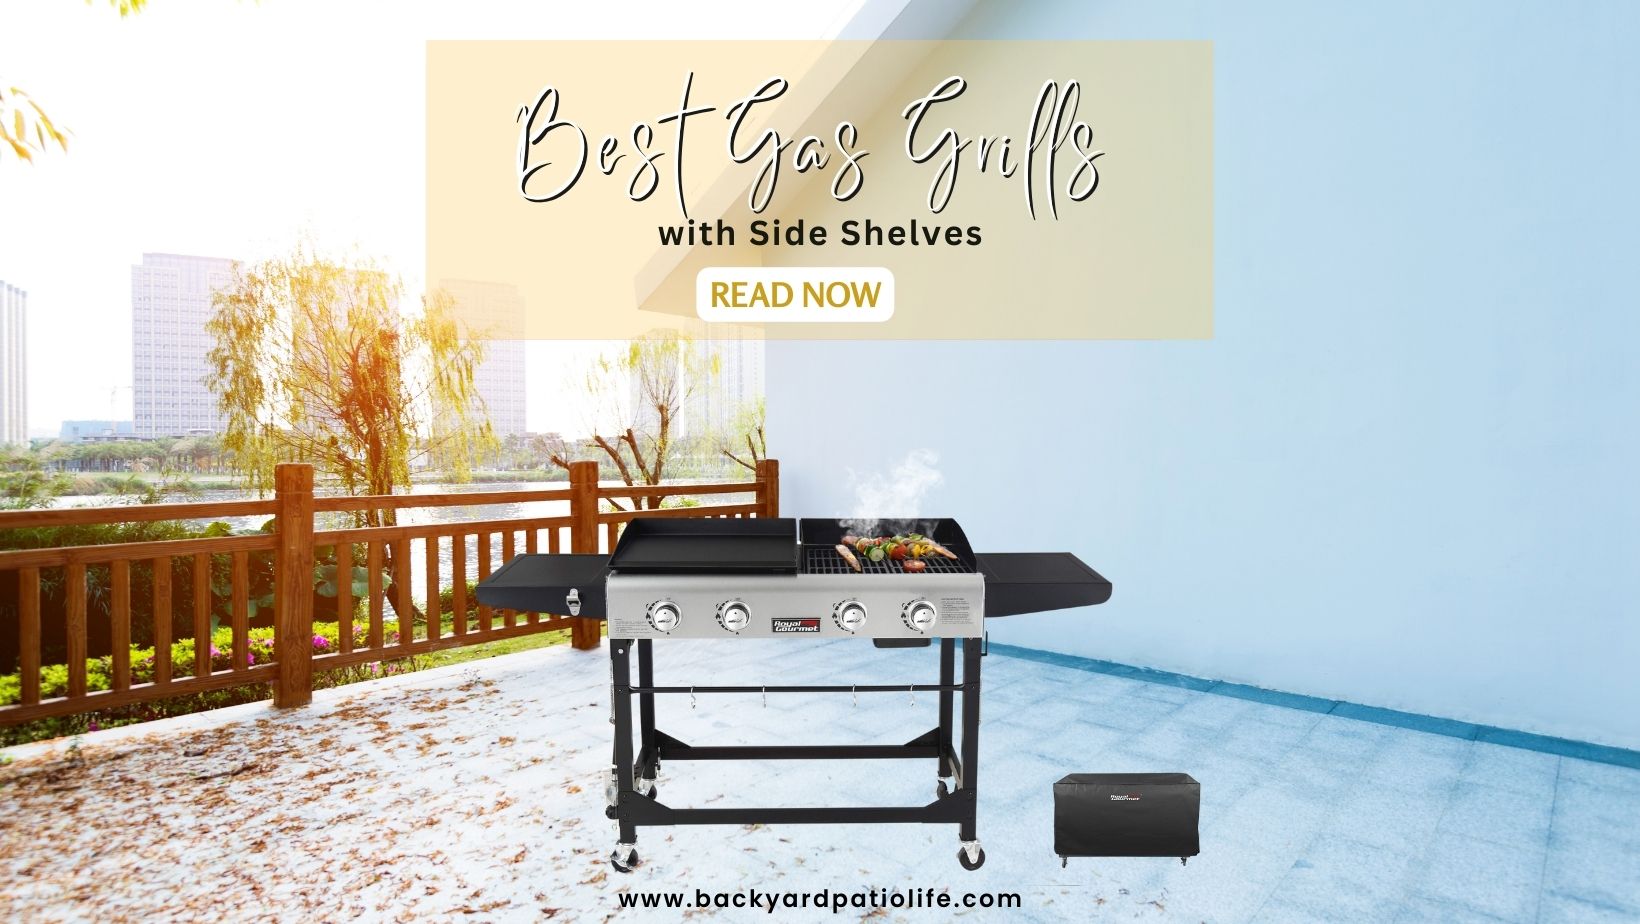 Title-Best Gas Grills with Side Shelves